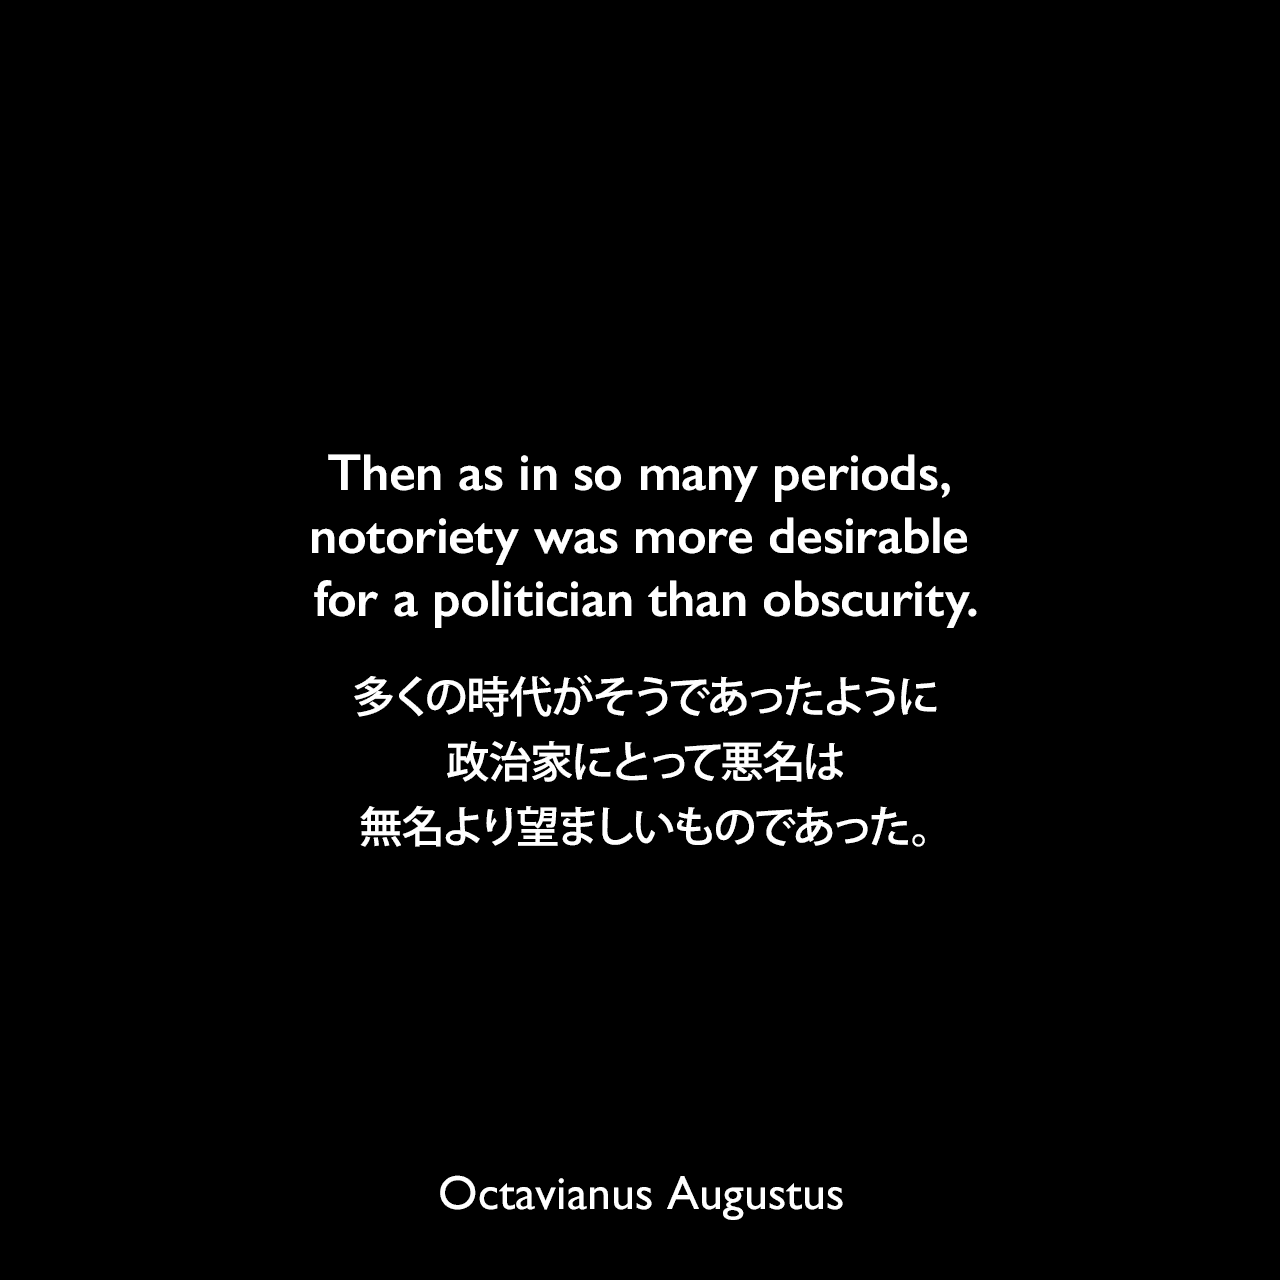 Then as in so many periods, notoriety was more desirable for a politician than obscurity.多くの時代がそうであったように、政治家にとって悪名は無名より望ましいものであった。- 歴史学者エイドリアン・ゴールズワーシーによる本「Augustus: First Emperor of Rome」よりOctavianus Augustus